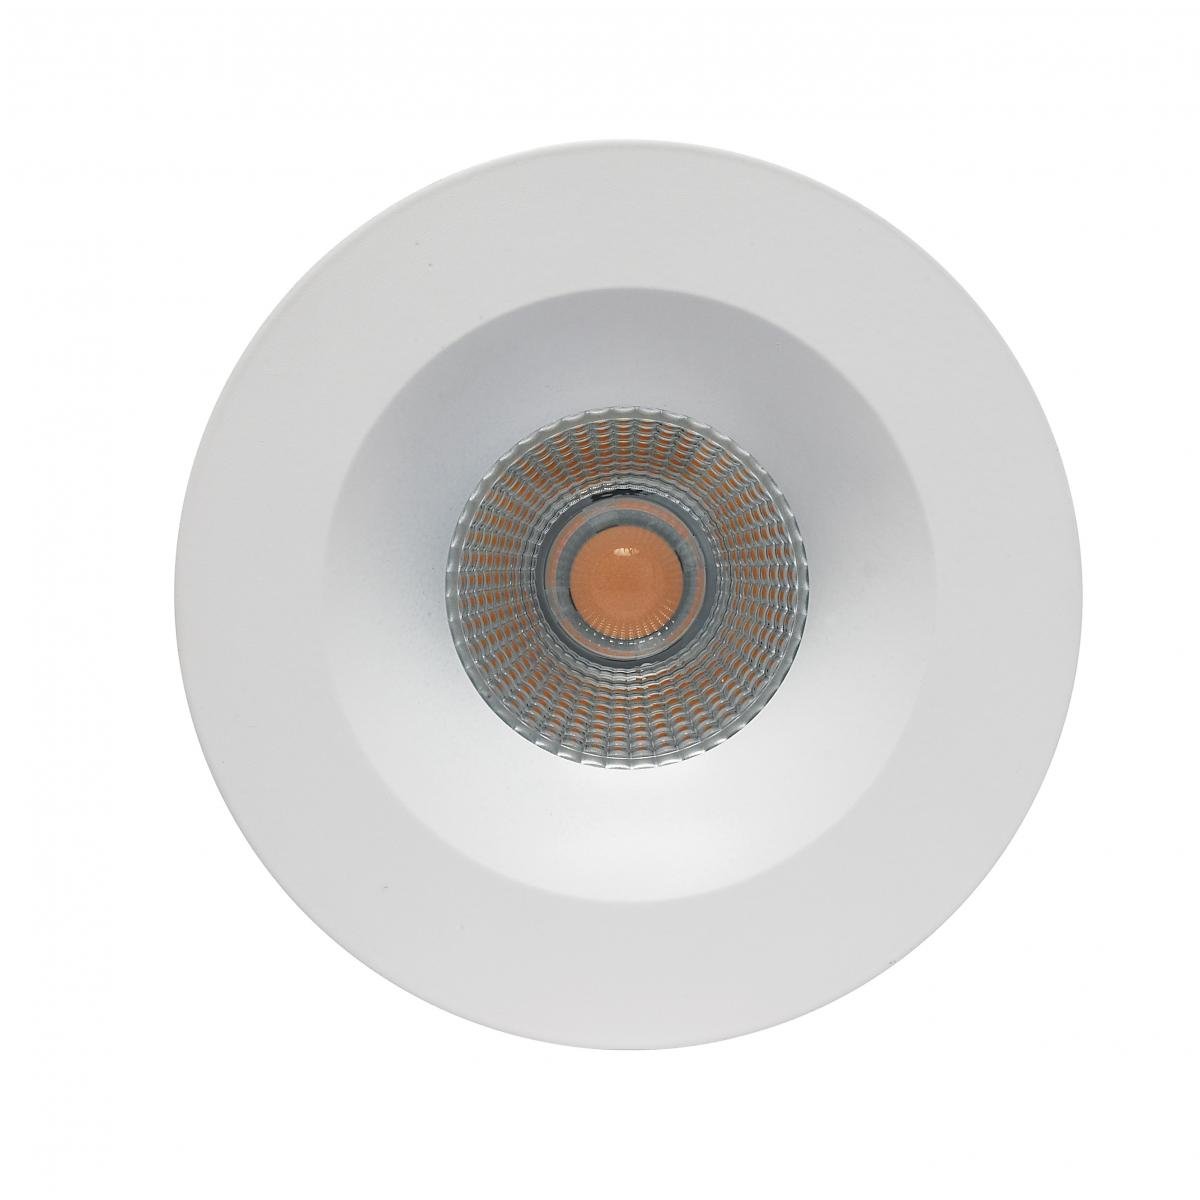 SATCO-S11630SATCO S11630 12W LED Round Recessed Direct Wire Downlight 3.5" 30K